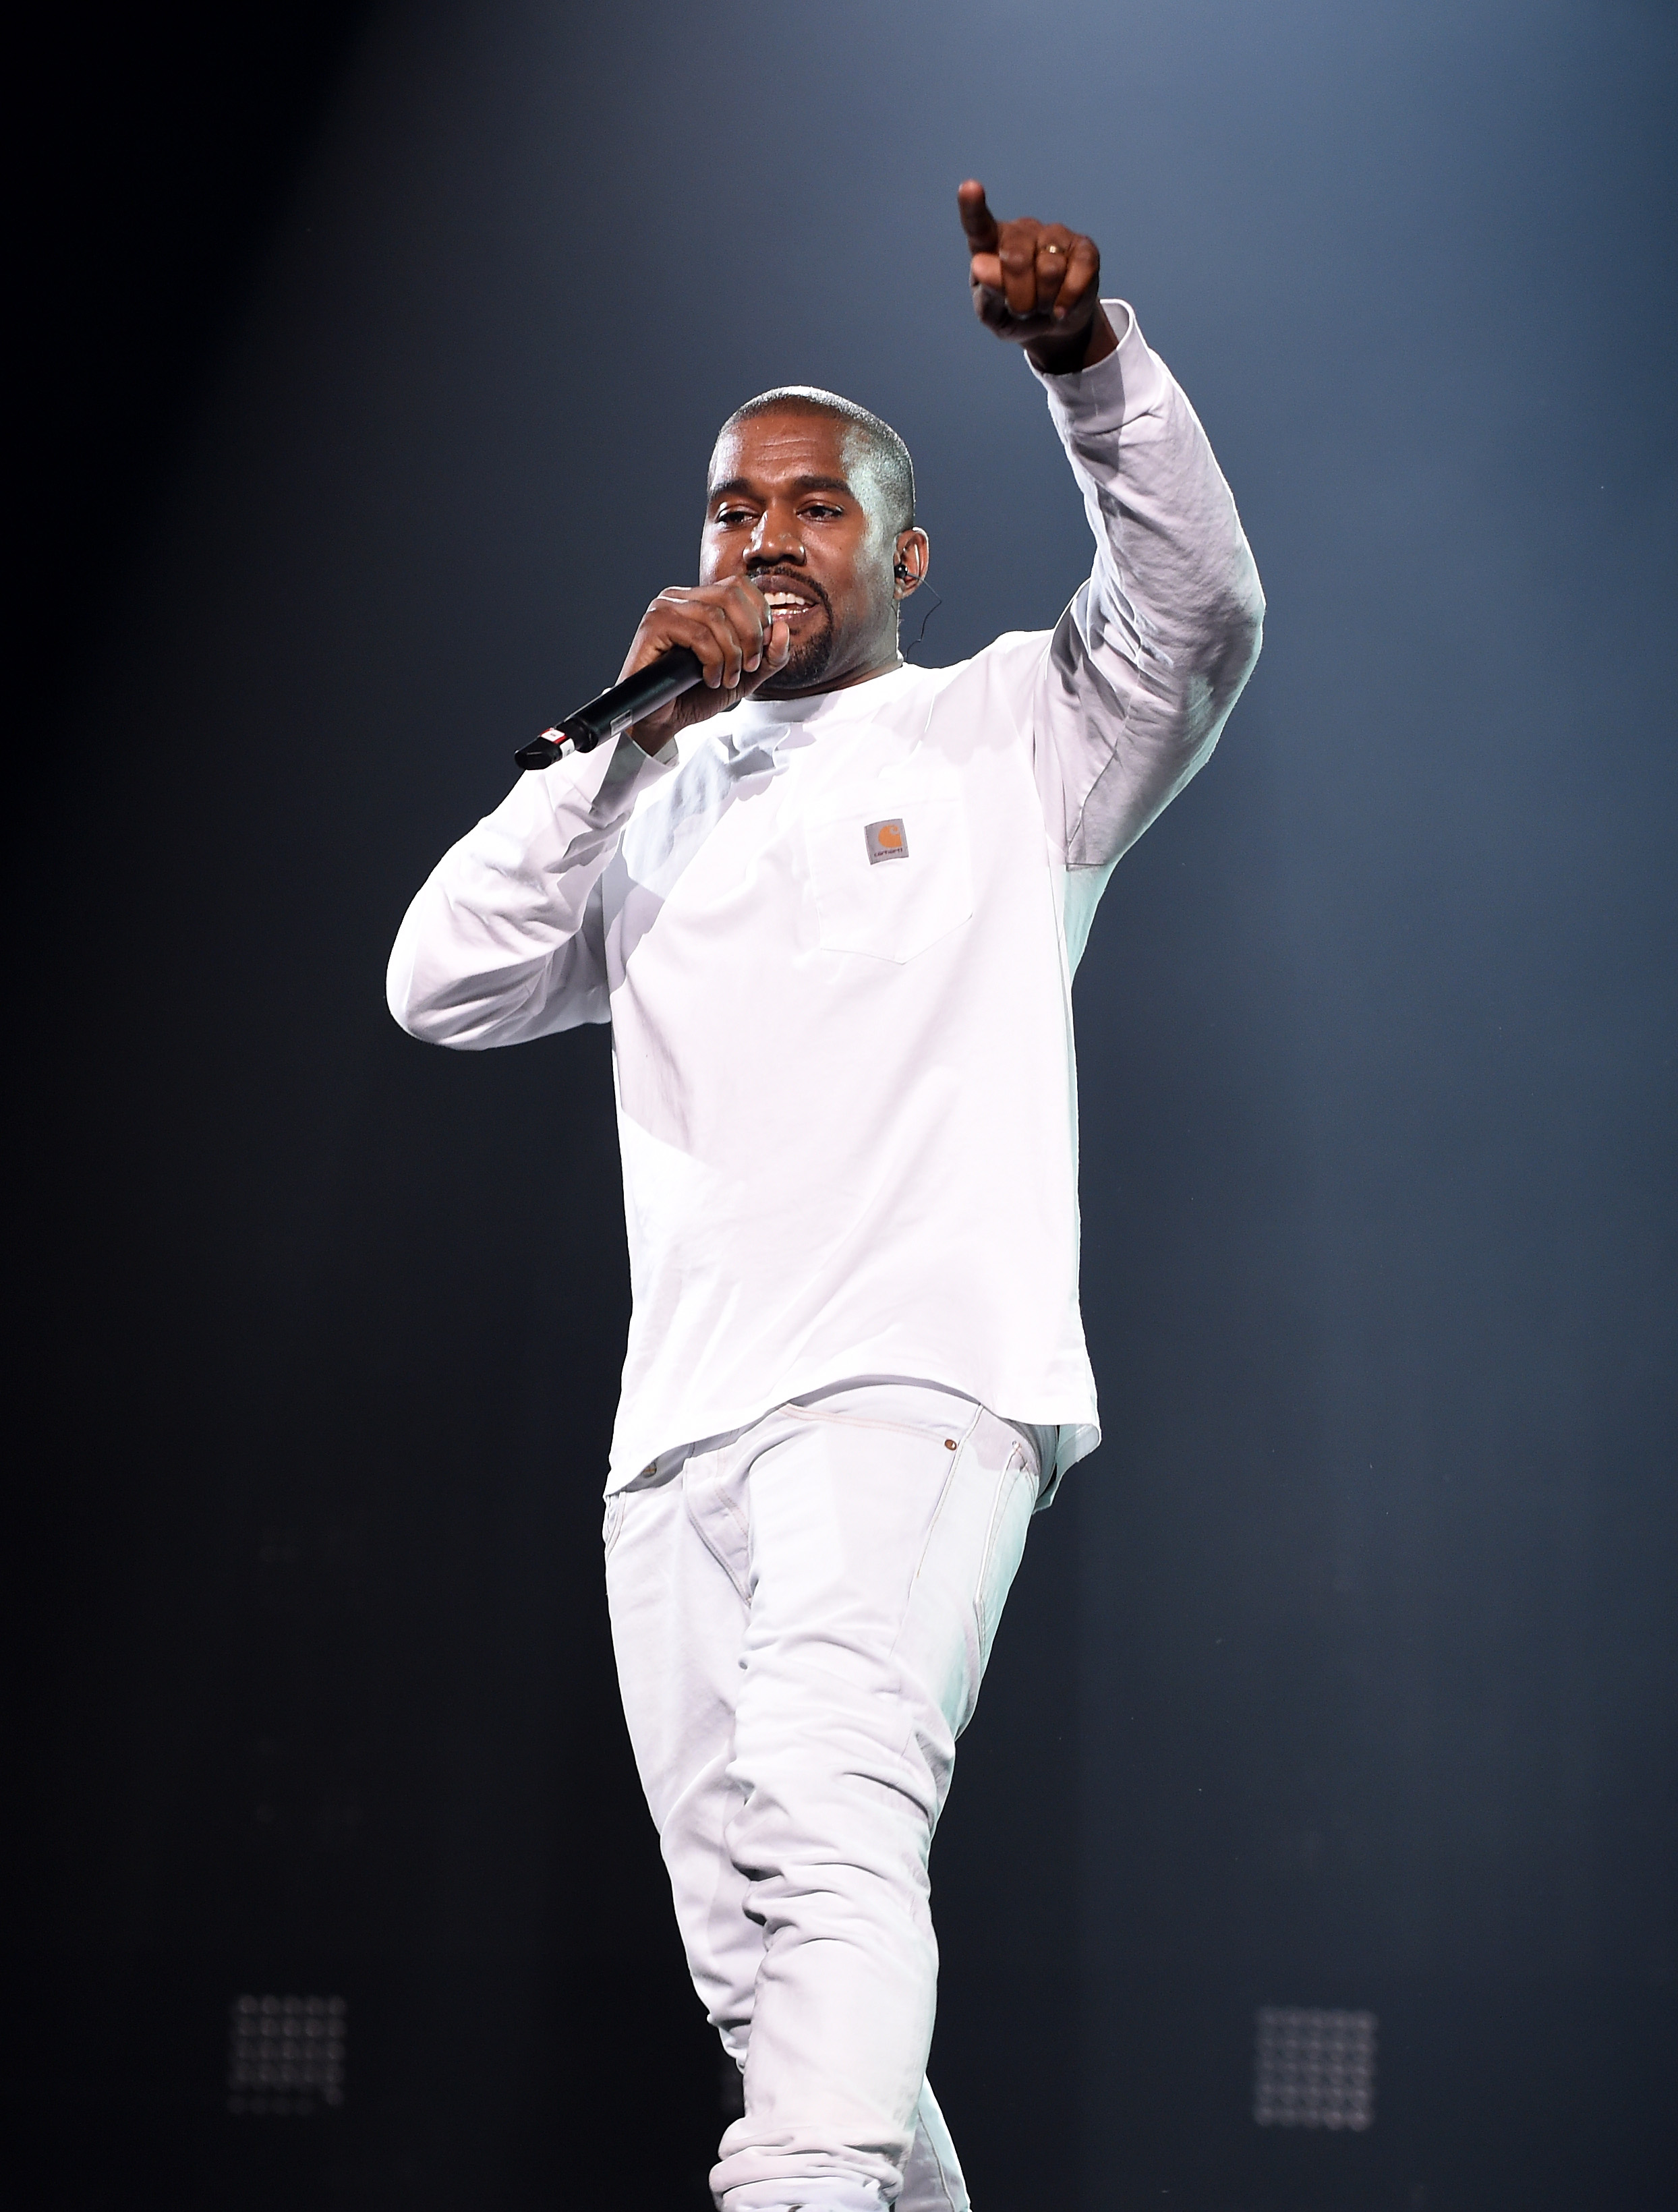 In an unconfirmed leaked track, Kanye takes a verse jab calling out Drake